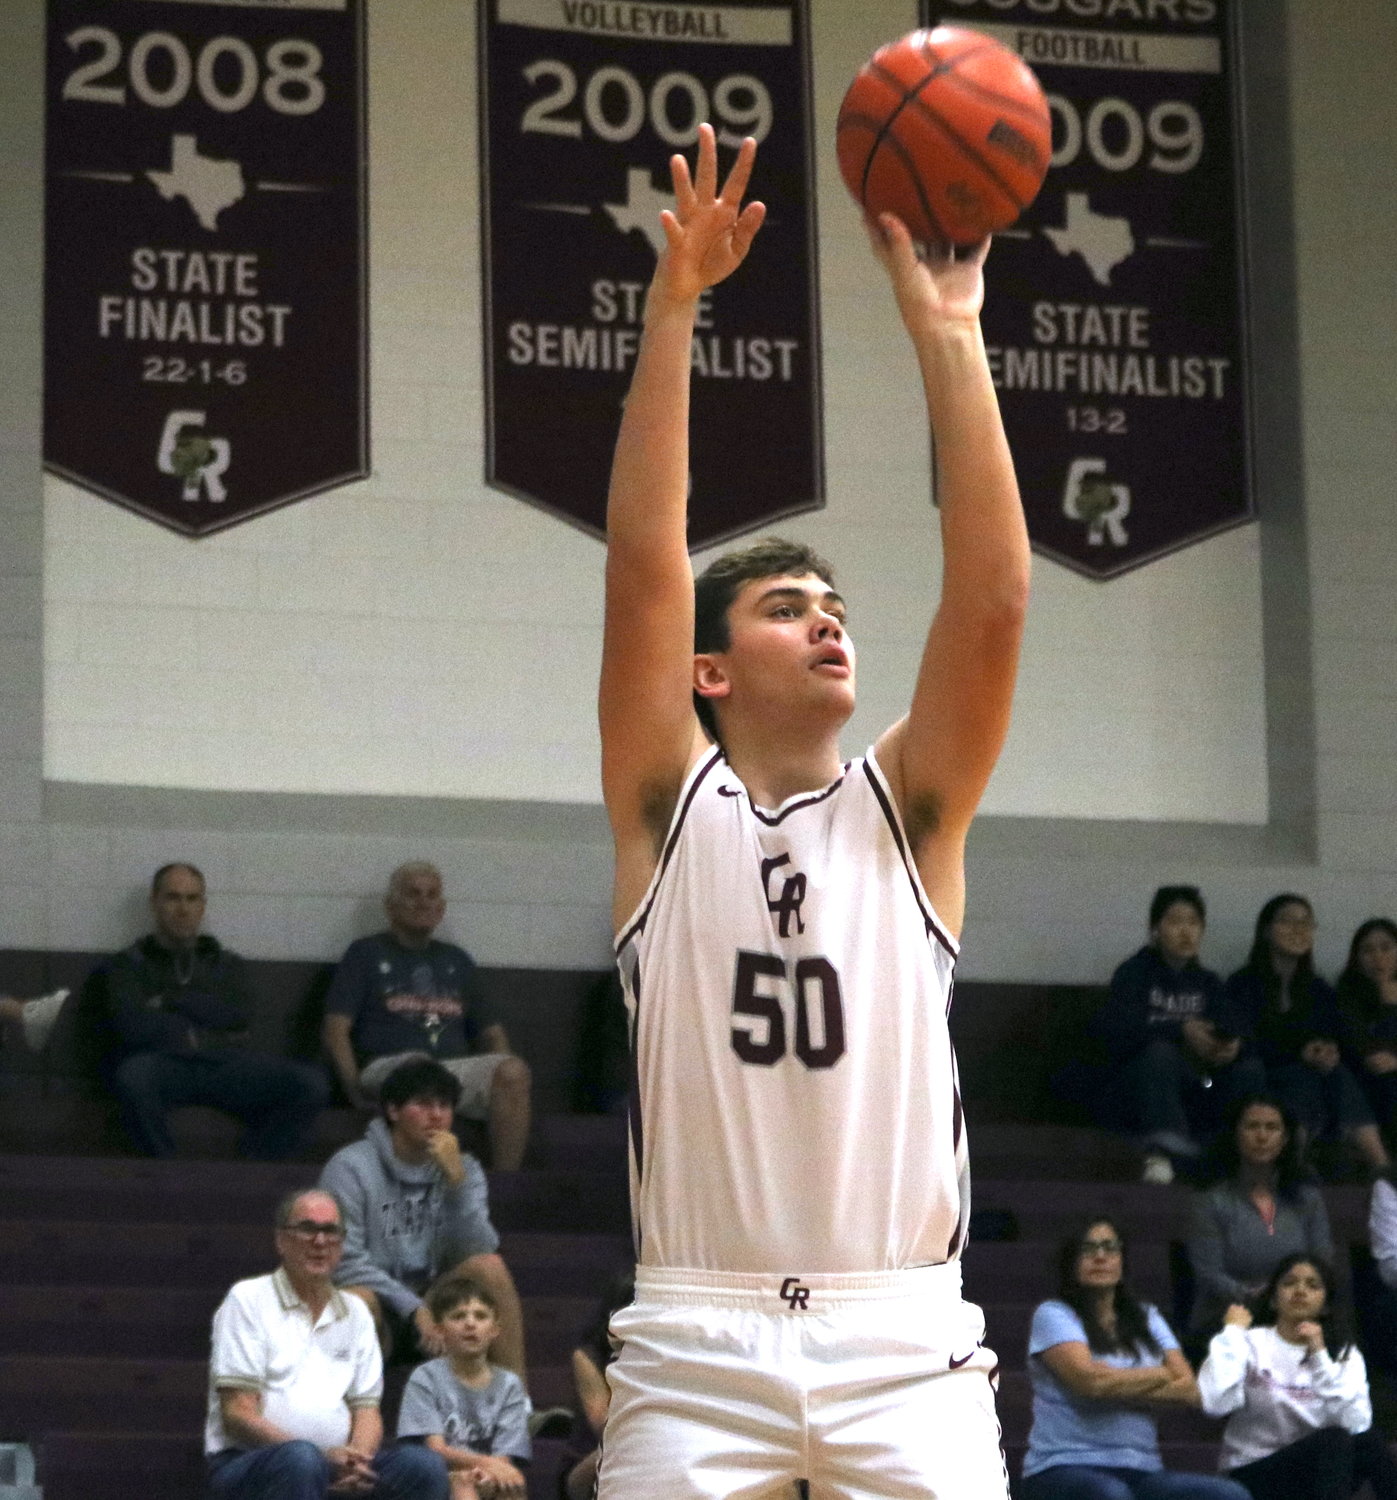 Harrison Moore shoots a jump shot during Wednesday's game between Cinco Ranch and Taylor at the Cinco Ranch gym.